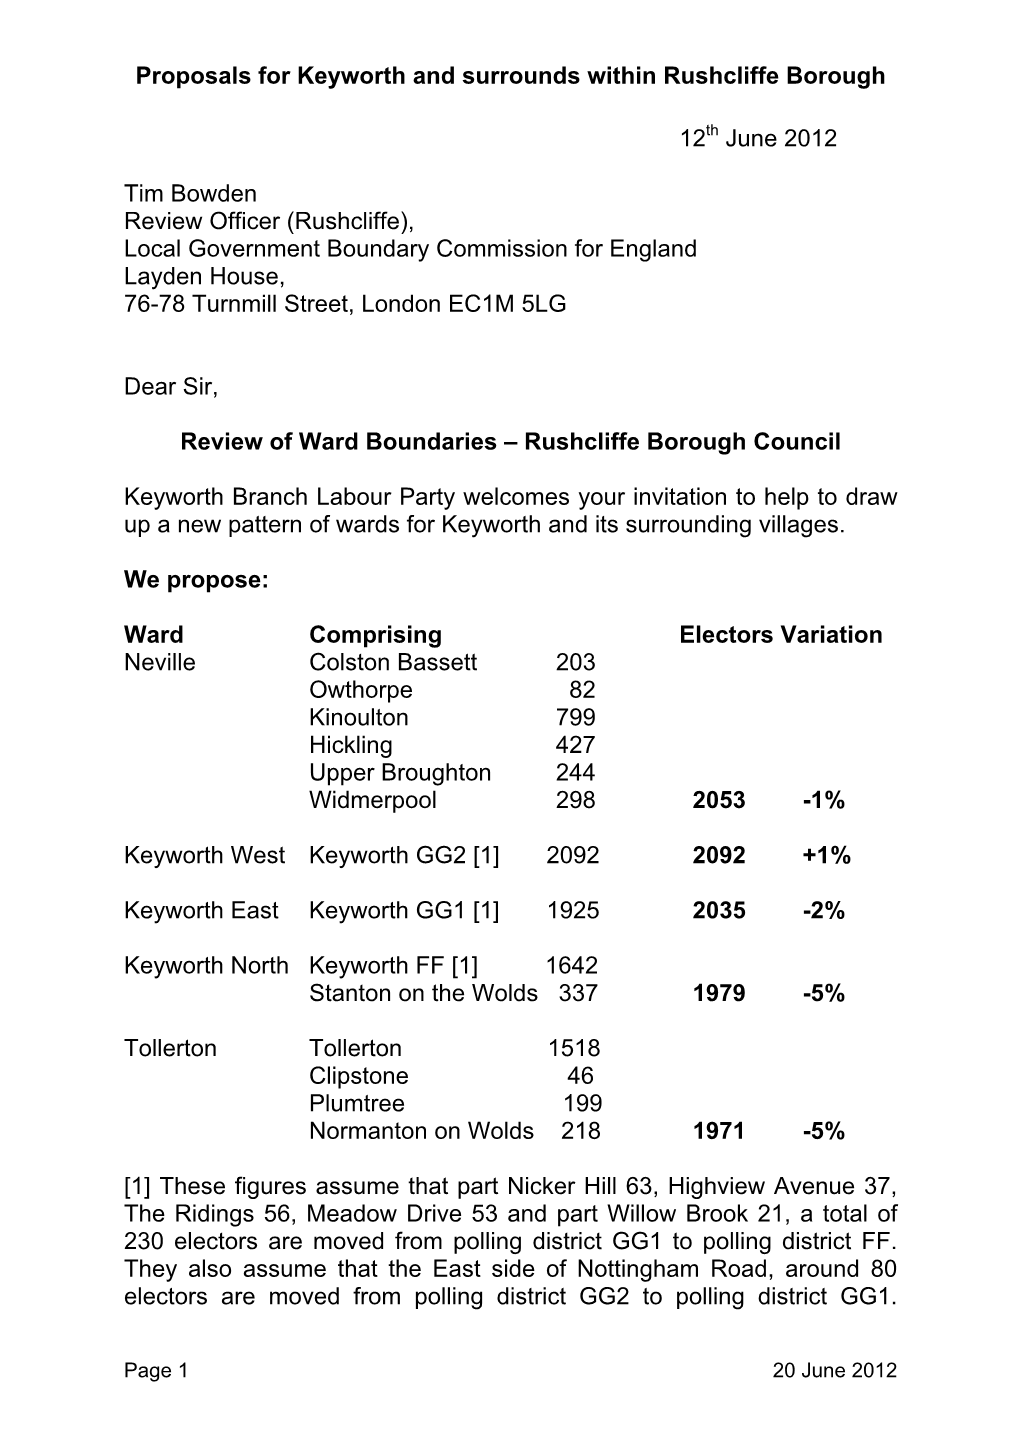 Proposals for Keyworth and Surrounds Within Rushcliffe Borough